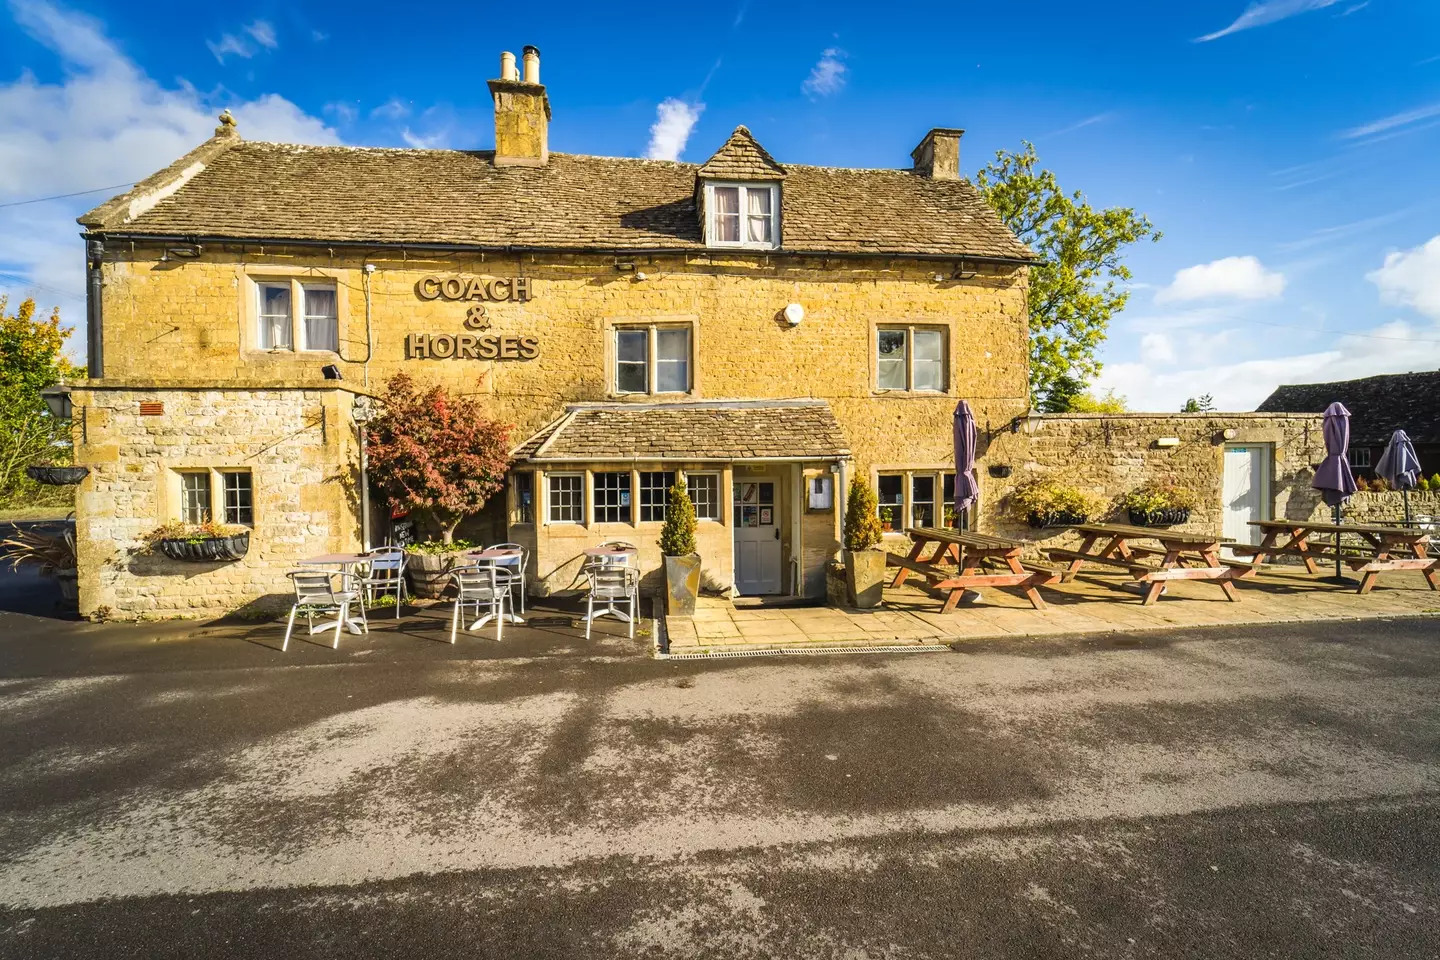 Coach & Horses at Bourton-on-the-Water. (Stonegate Group)